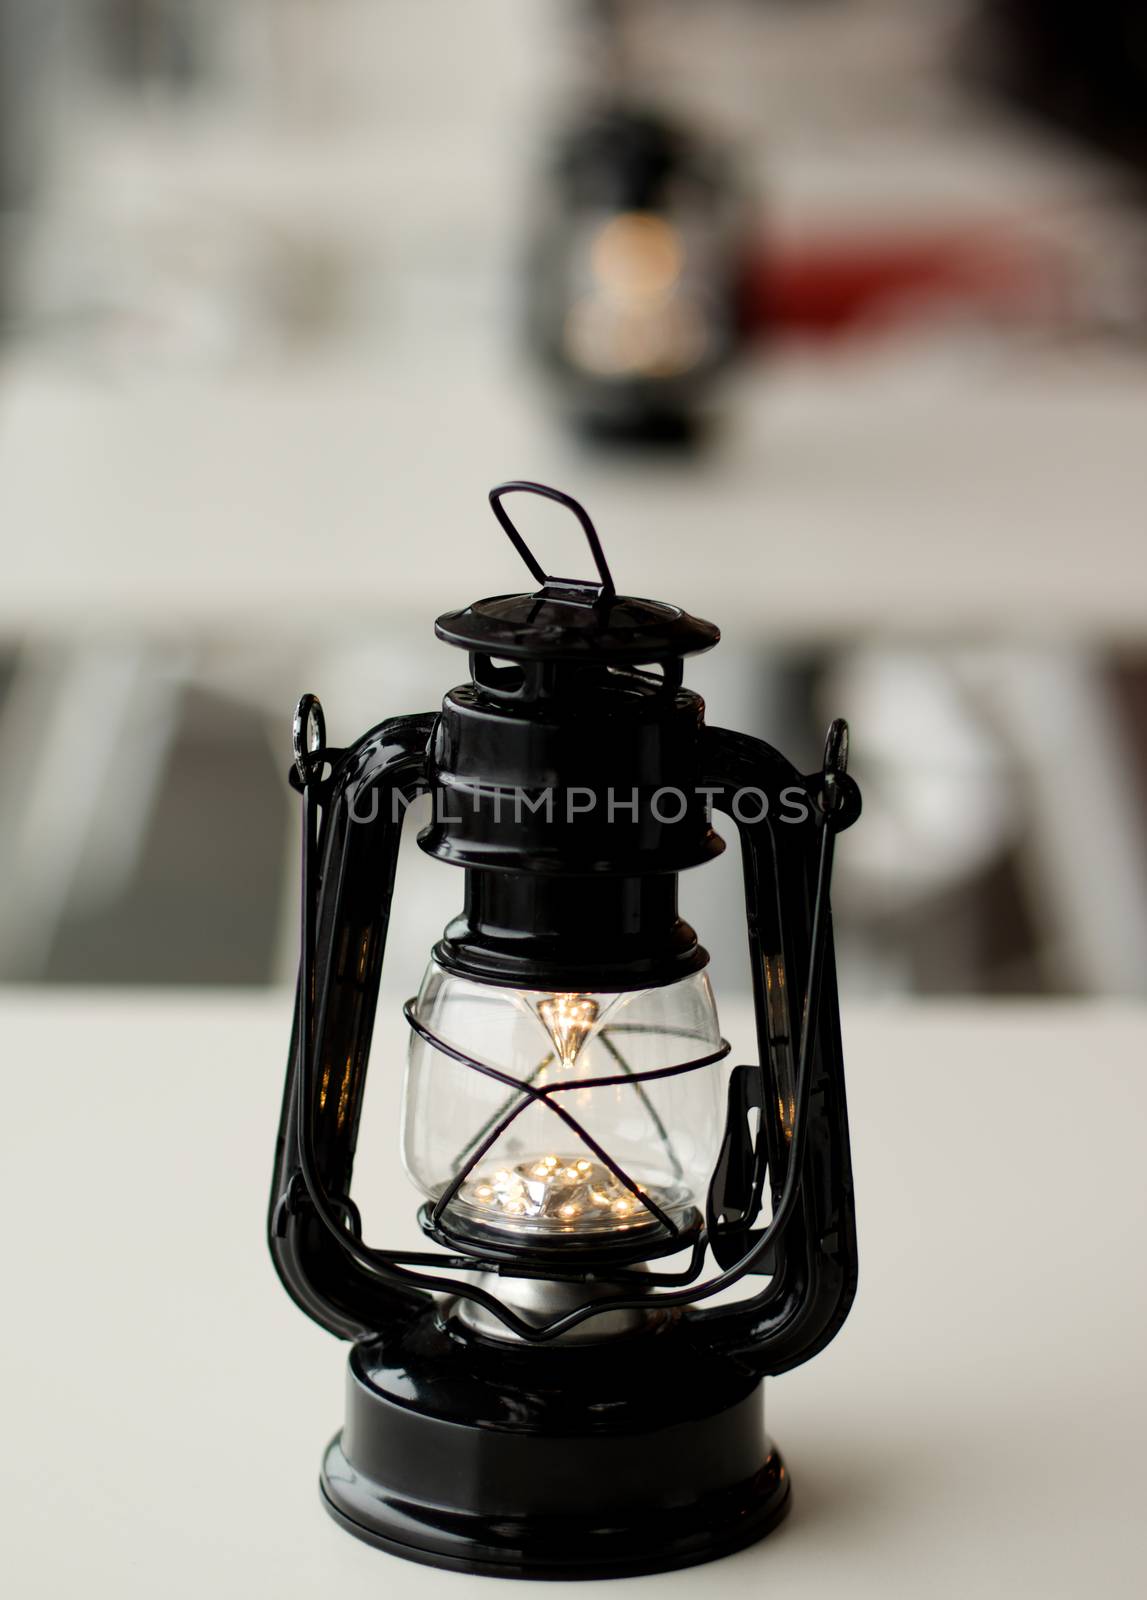 Old Fashioned Street Cafe Lantern on White Table closeup. Focus on Foreground